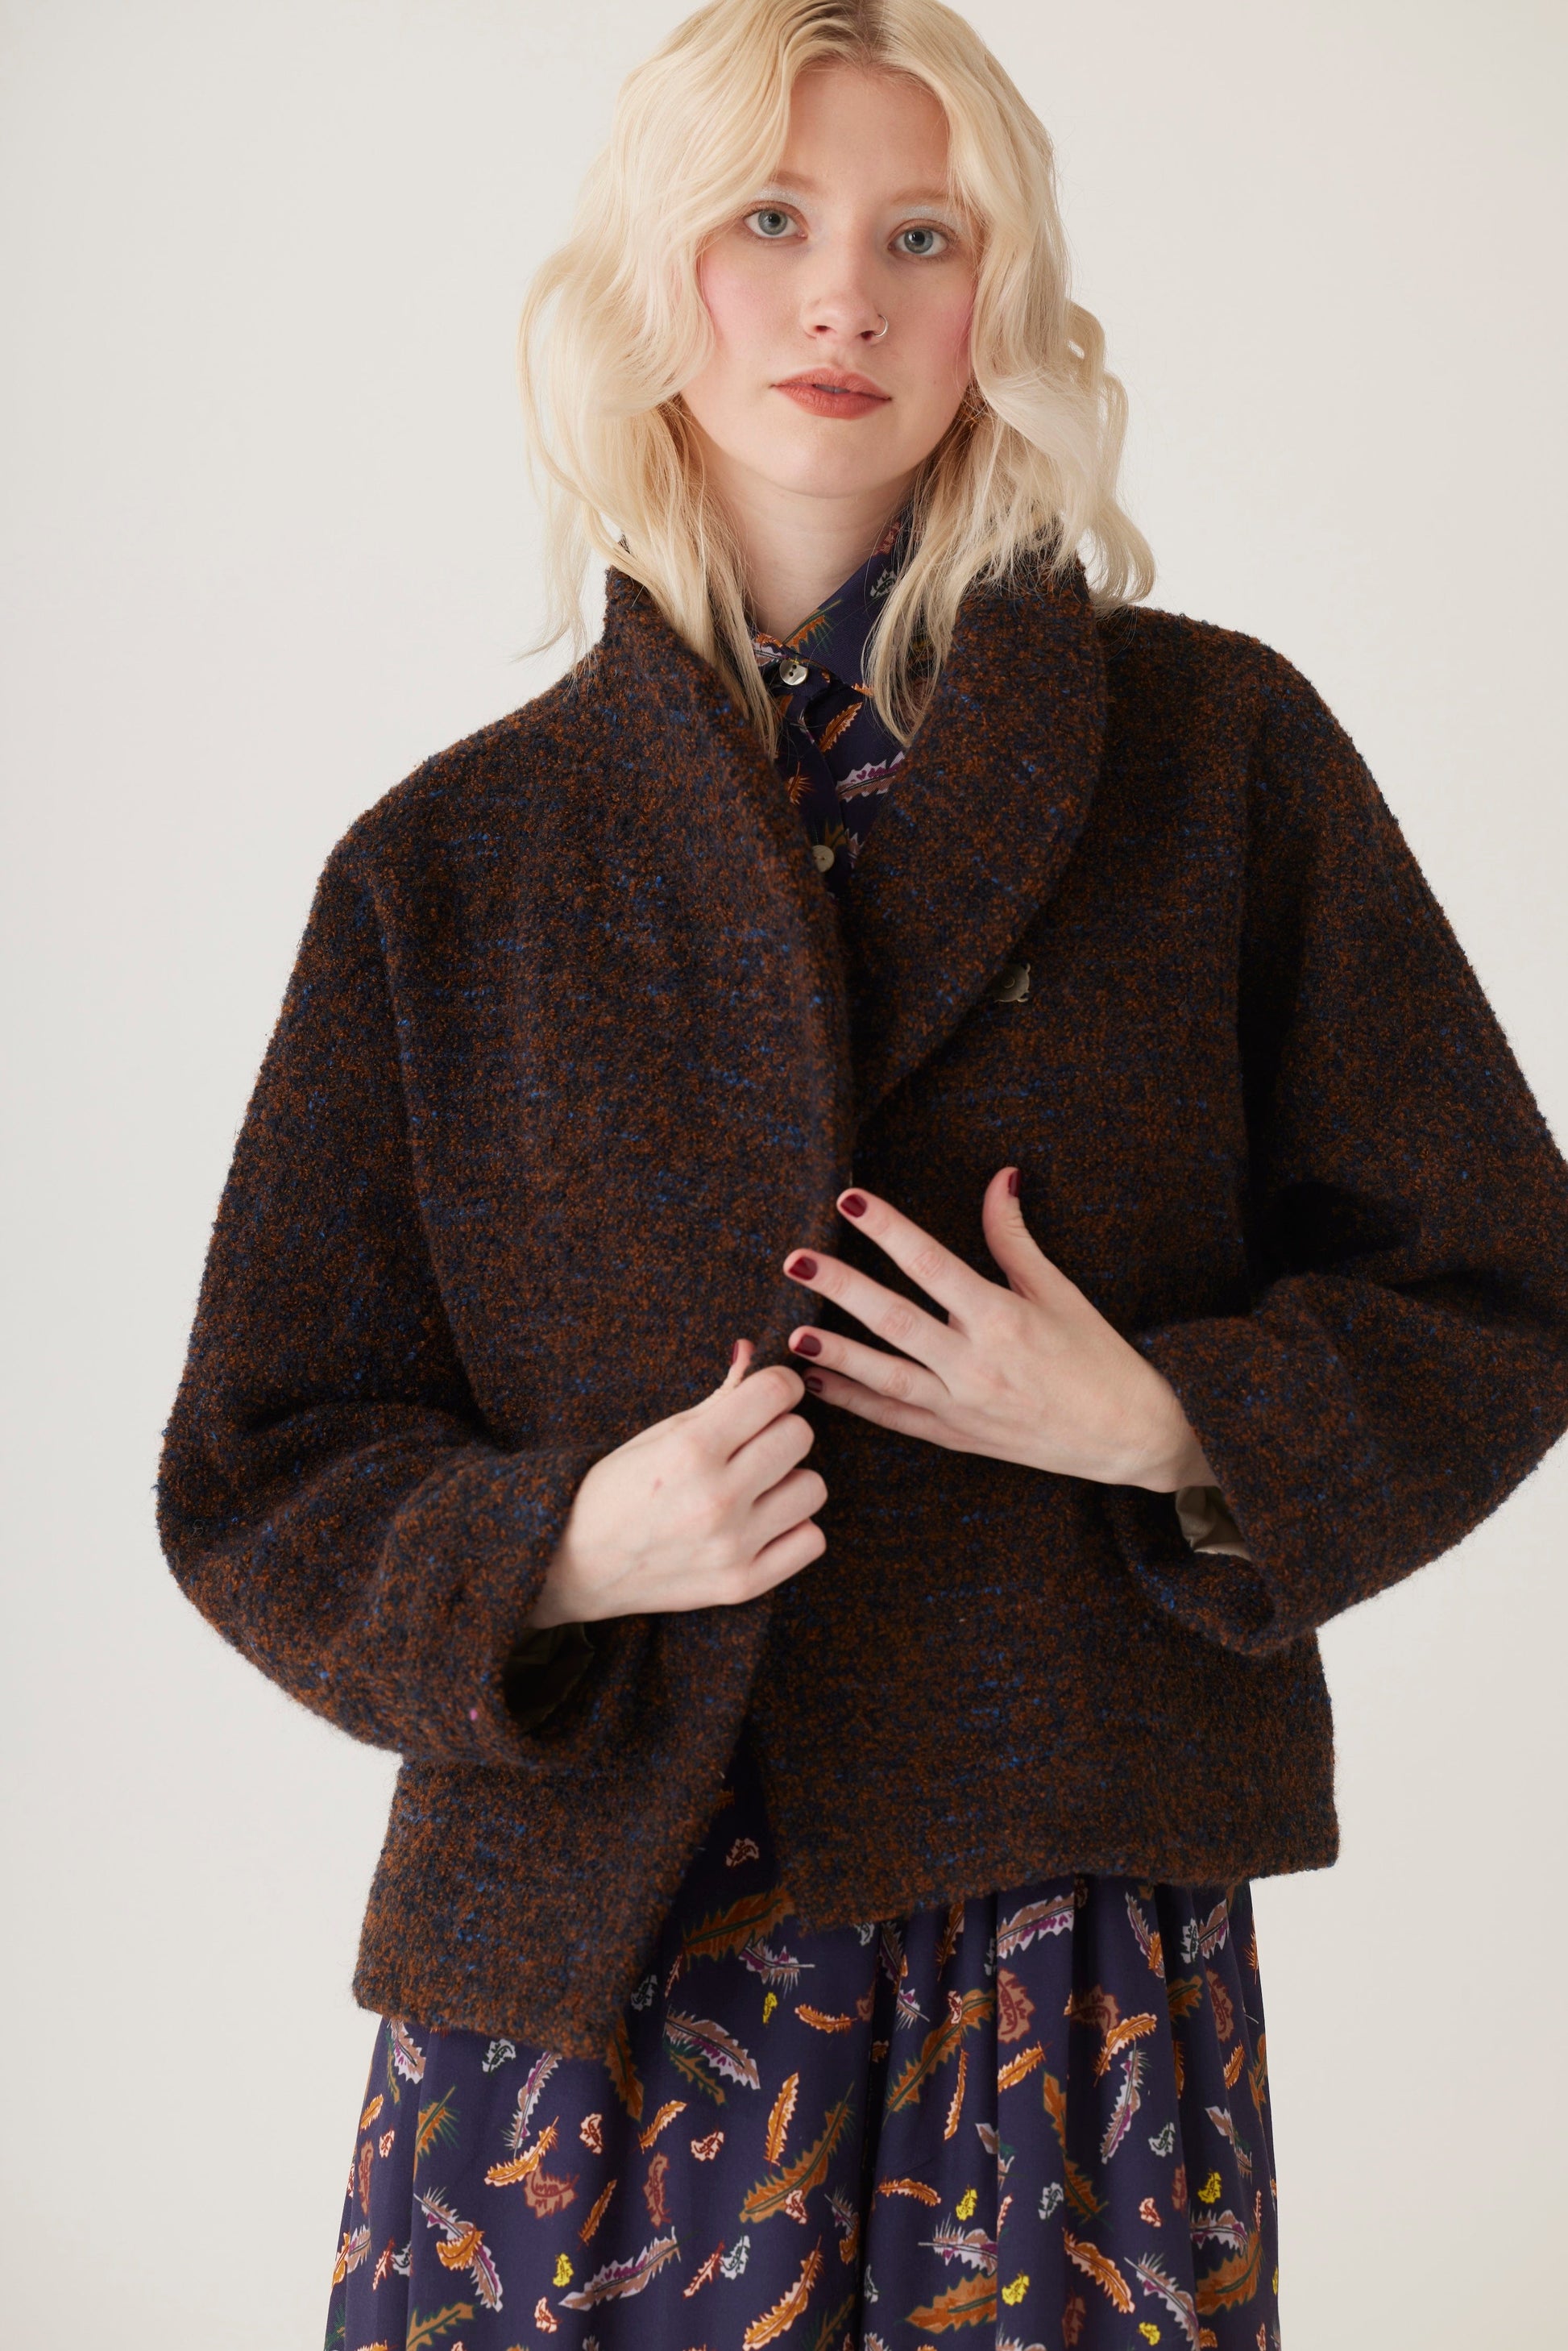 Jacquie Jacket in Boucle Wool Coat CHRISTINE ALCALAY Dark Blue/Brown Boucle Extra Small 